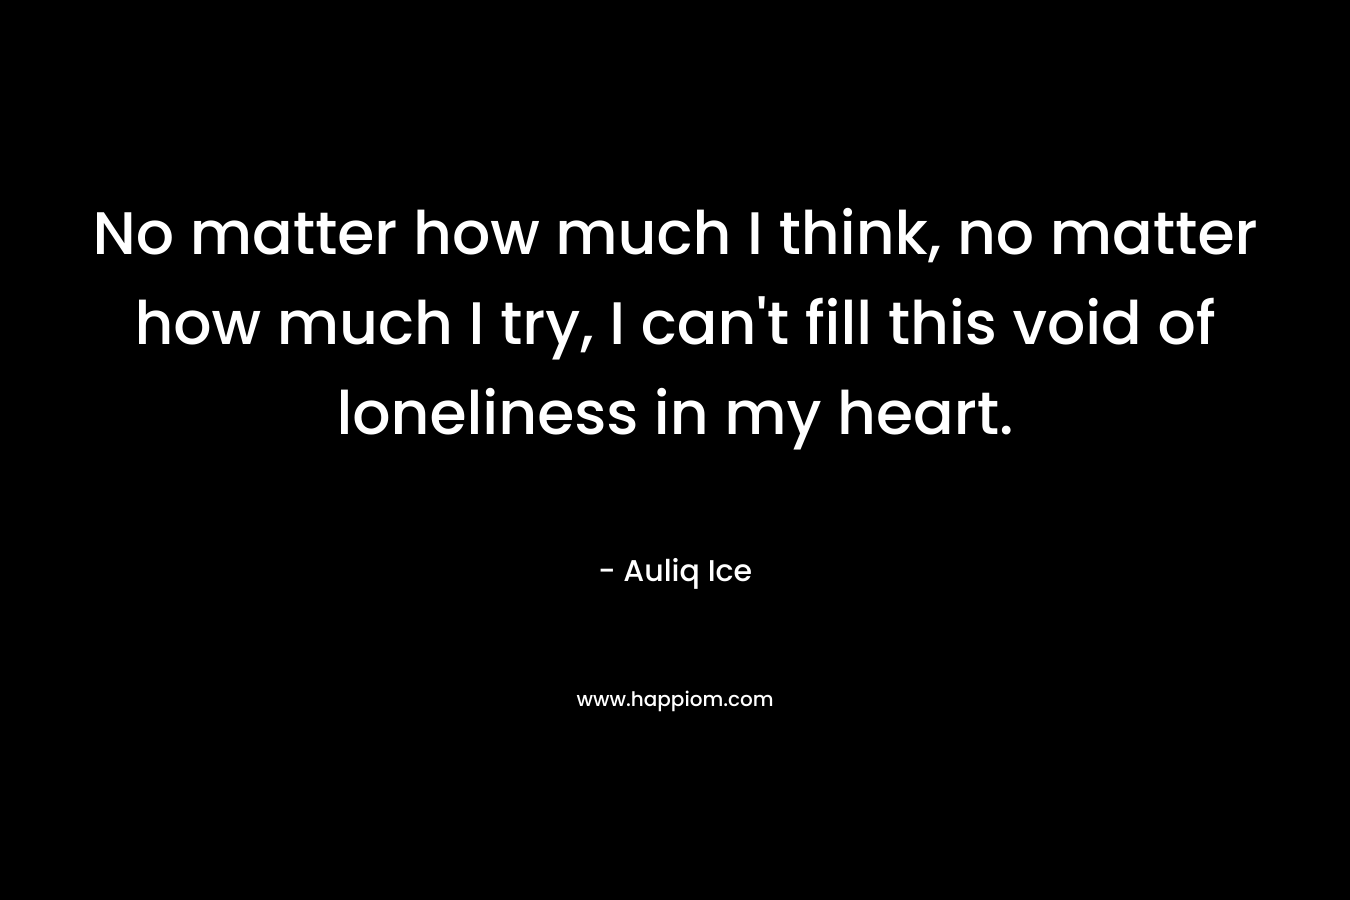 No matter how much I think, no matter how much I try, I can't fill this void of loneliness in my heart.